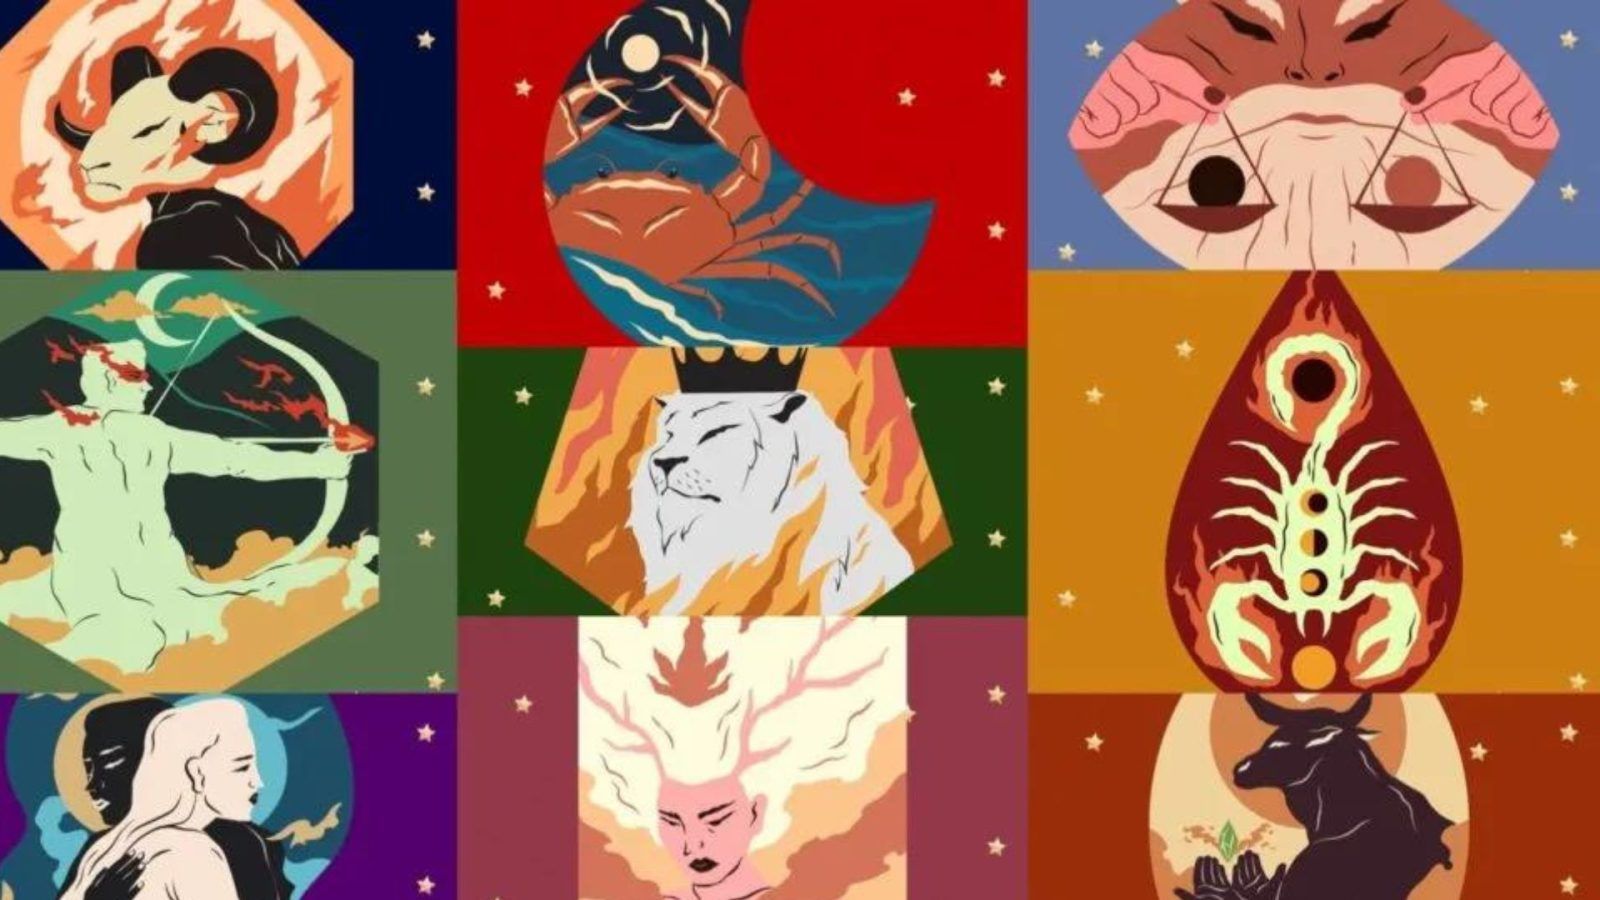 January horoscope 2023: What's in store for the 12 zodiac signs